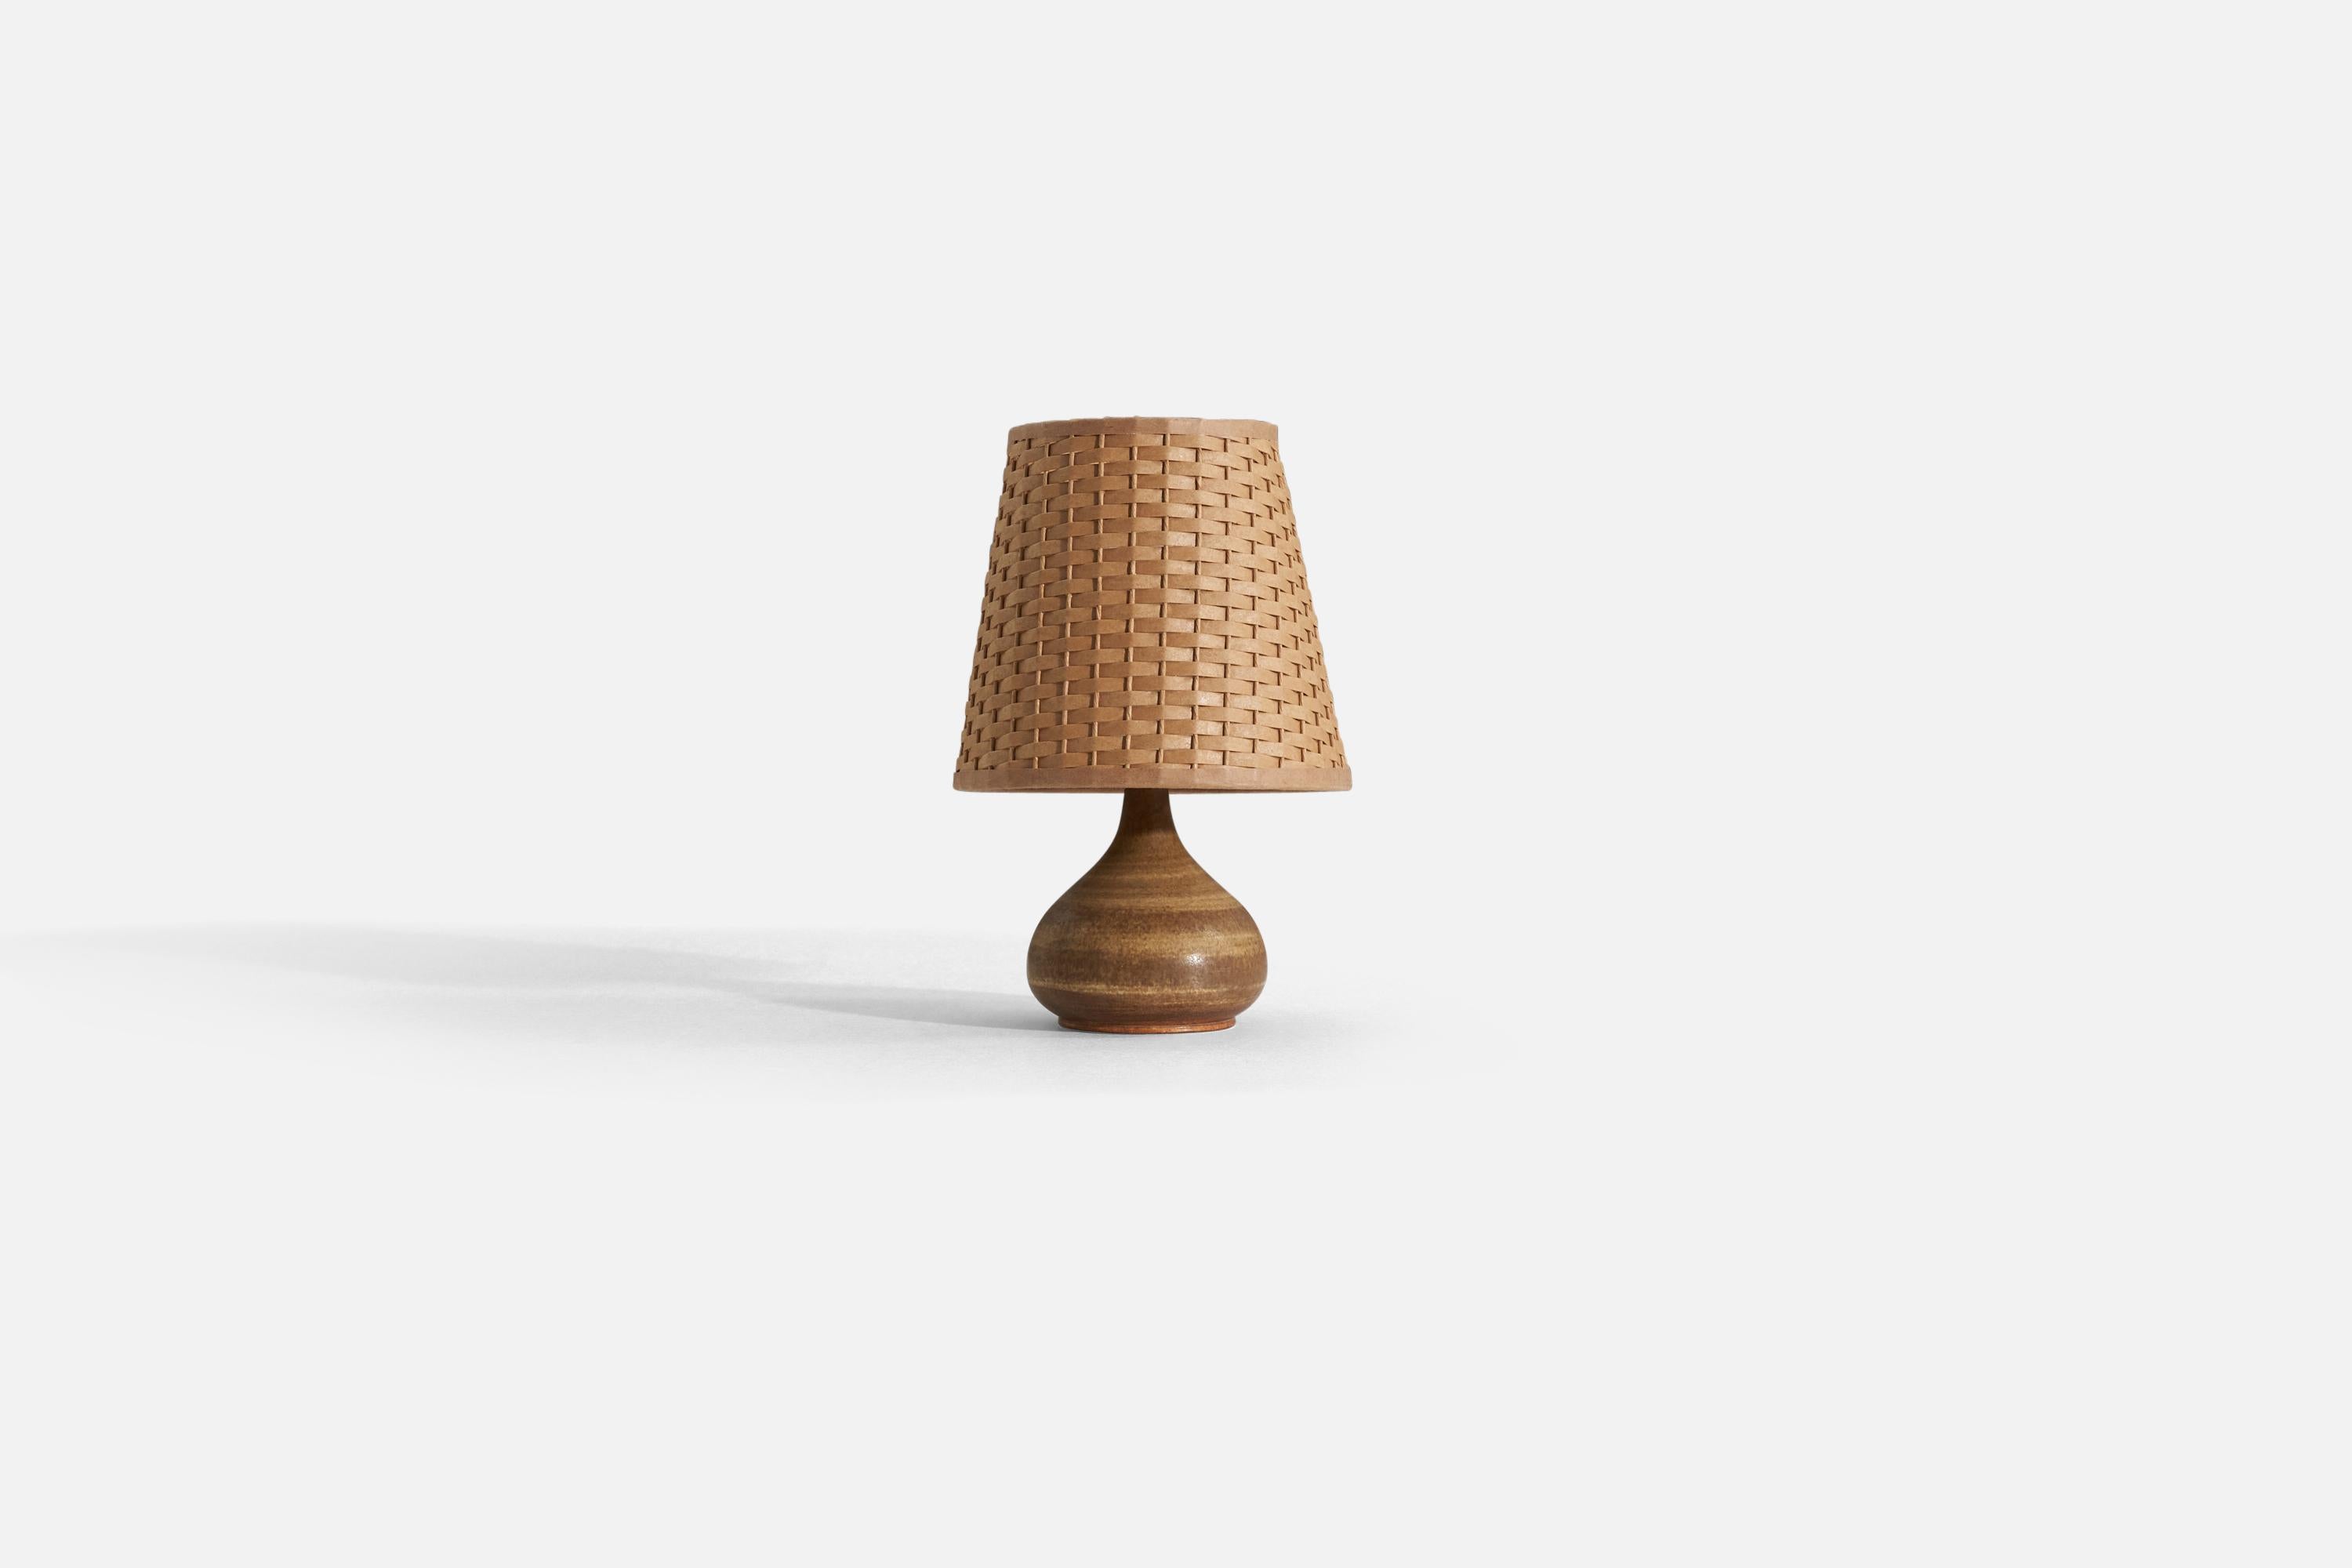 Mid-20th Century Gunnar Borg, Table Lamp, Brown-Glazed Stoneware, Rattan, Sweden, 1960s For Sale